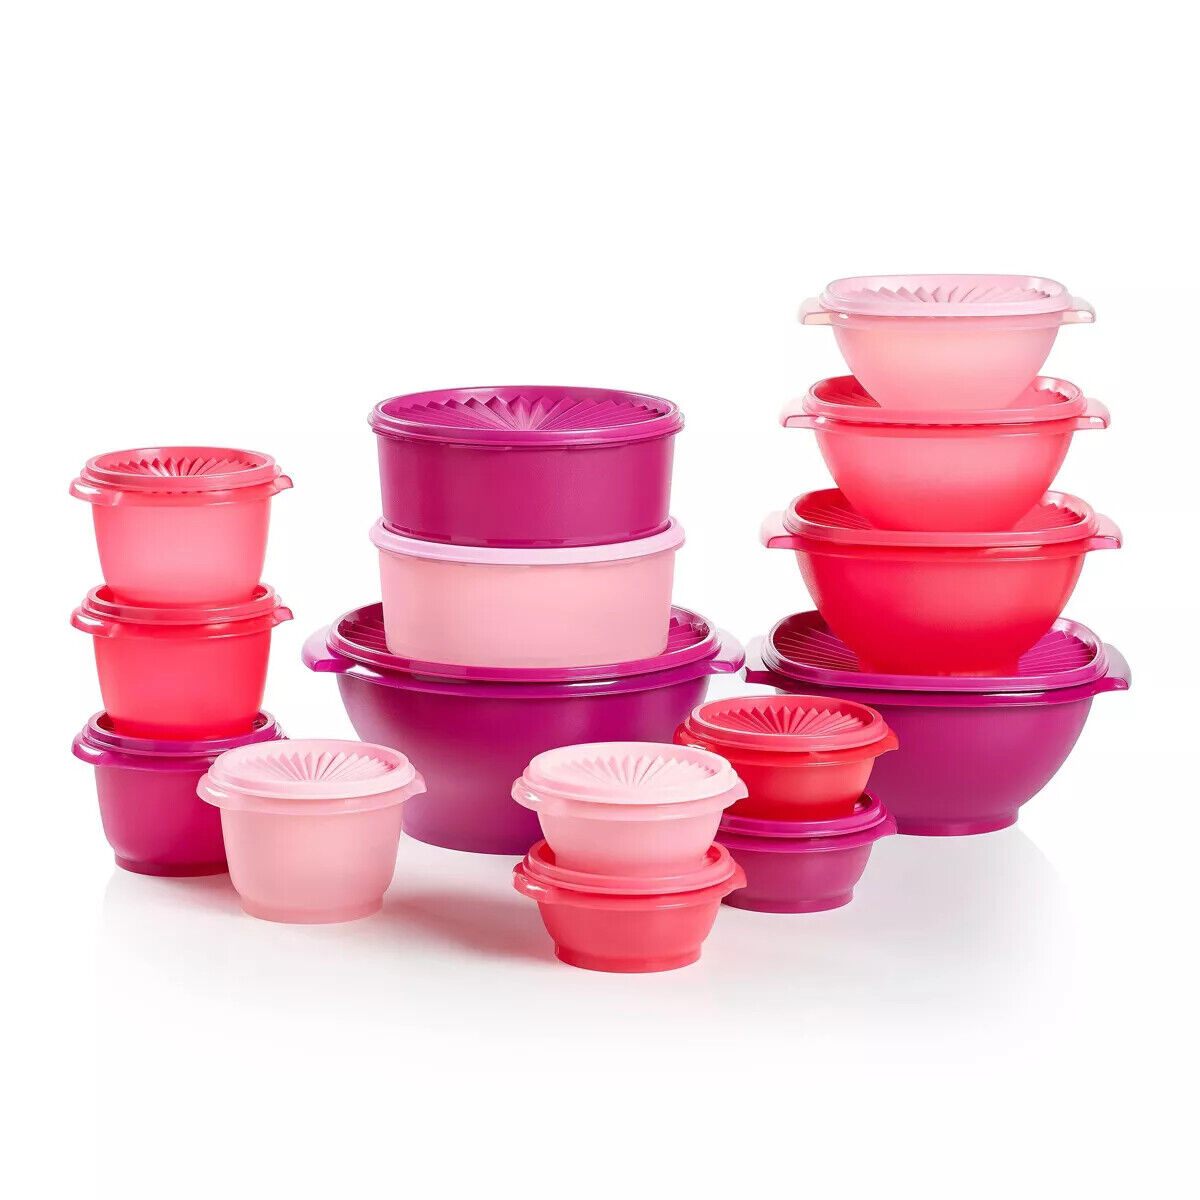 Tupperware 30pc Heritage Get it All Set Food Storage Container Set Color Pink